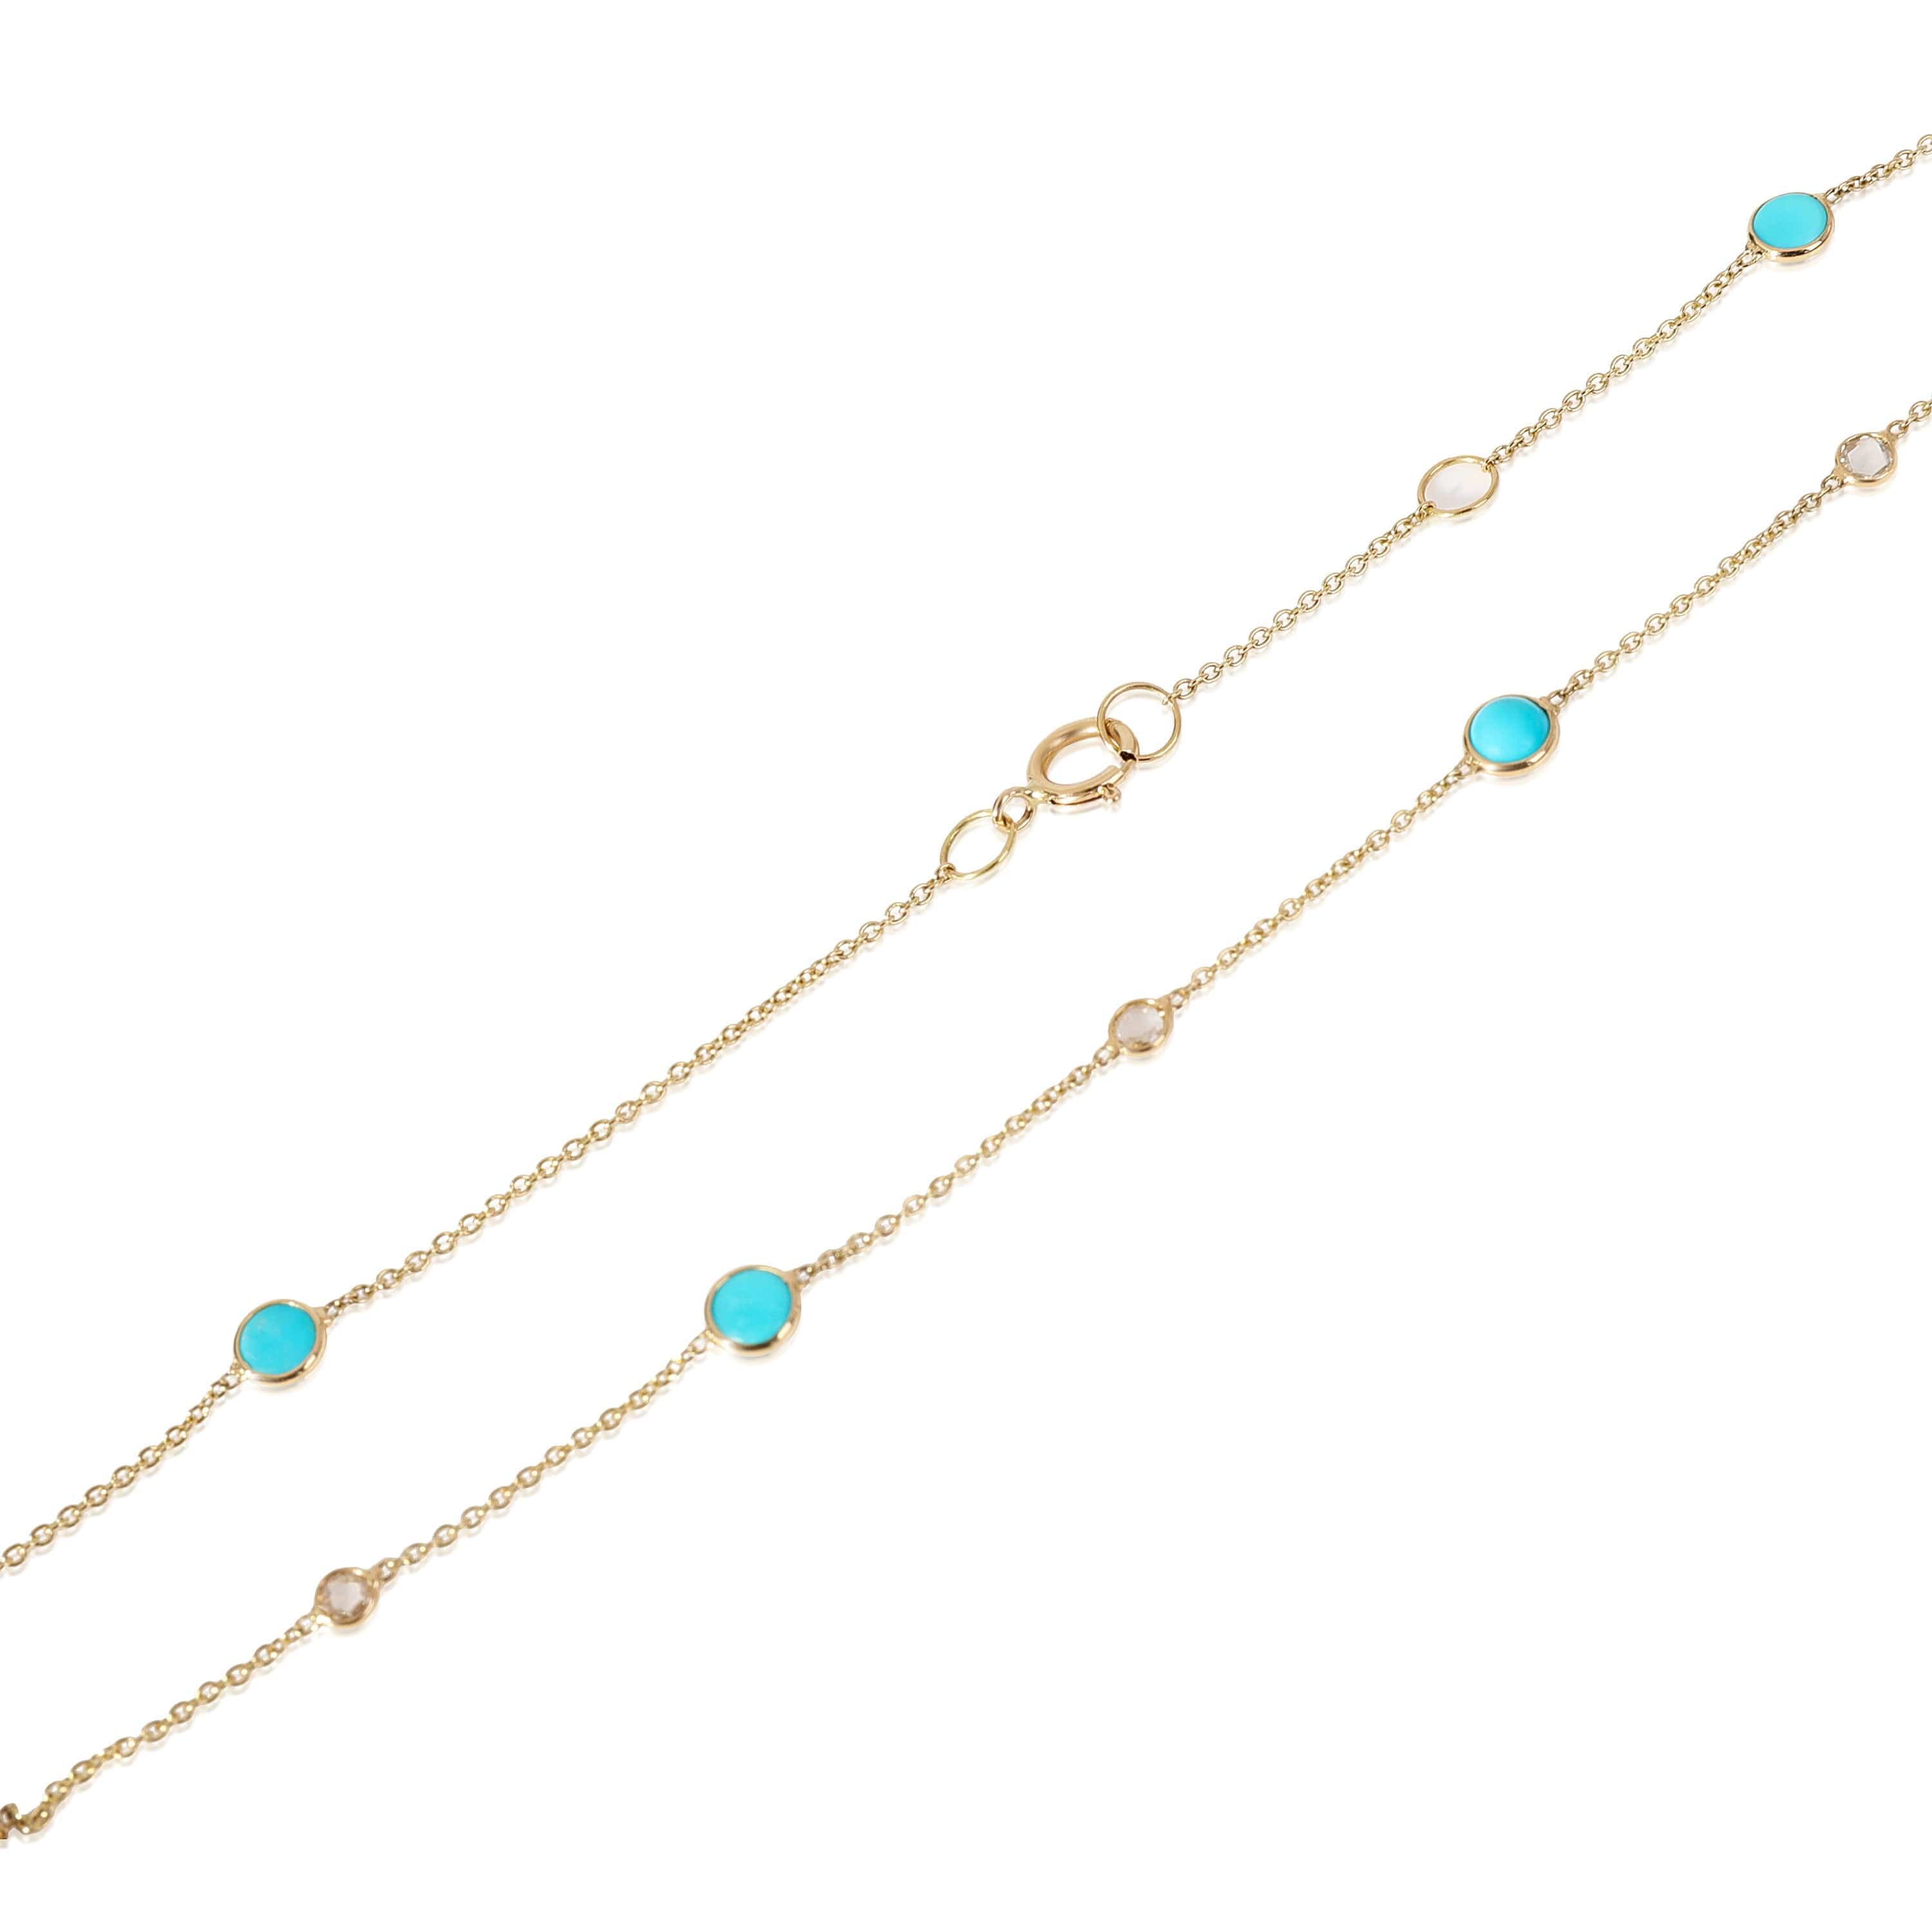 Luxury Promise Turquoise Diamond Station Necklace in 18k Yellow Gold 0.09 CTW